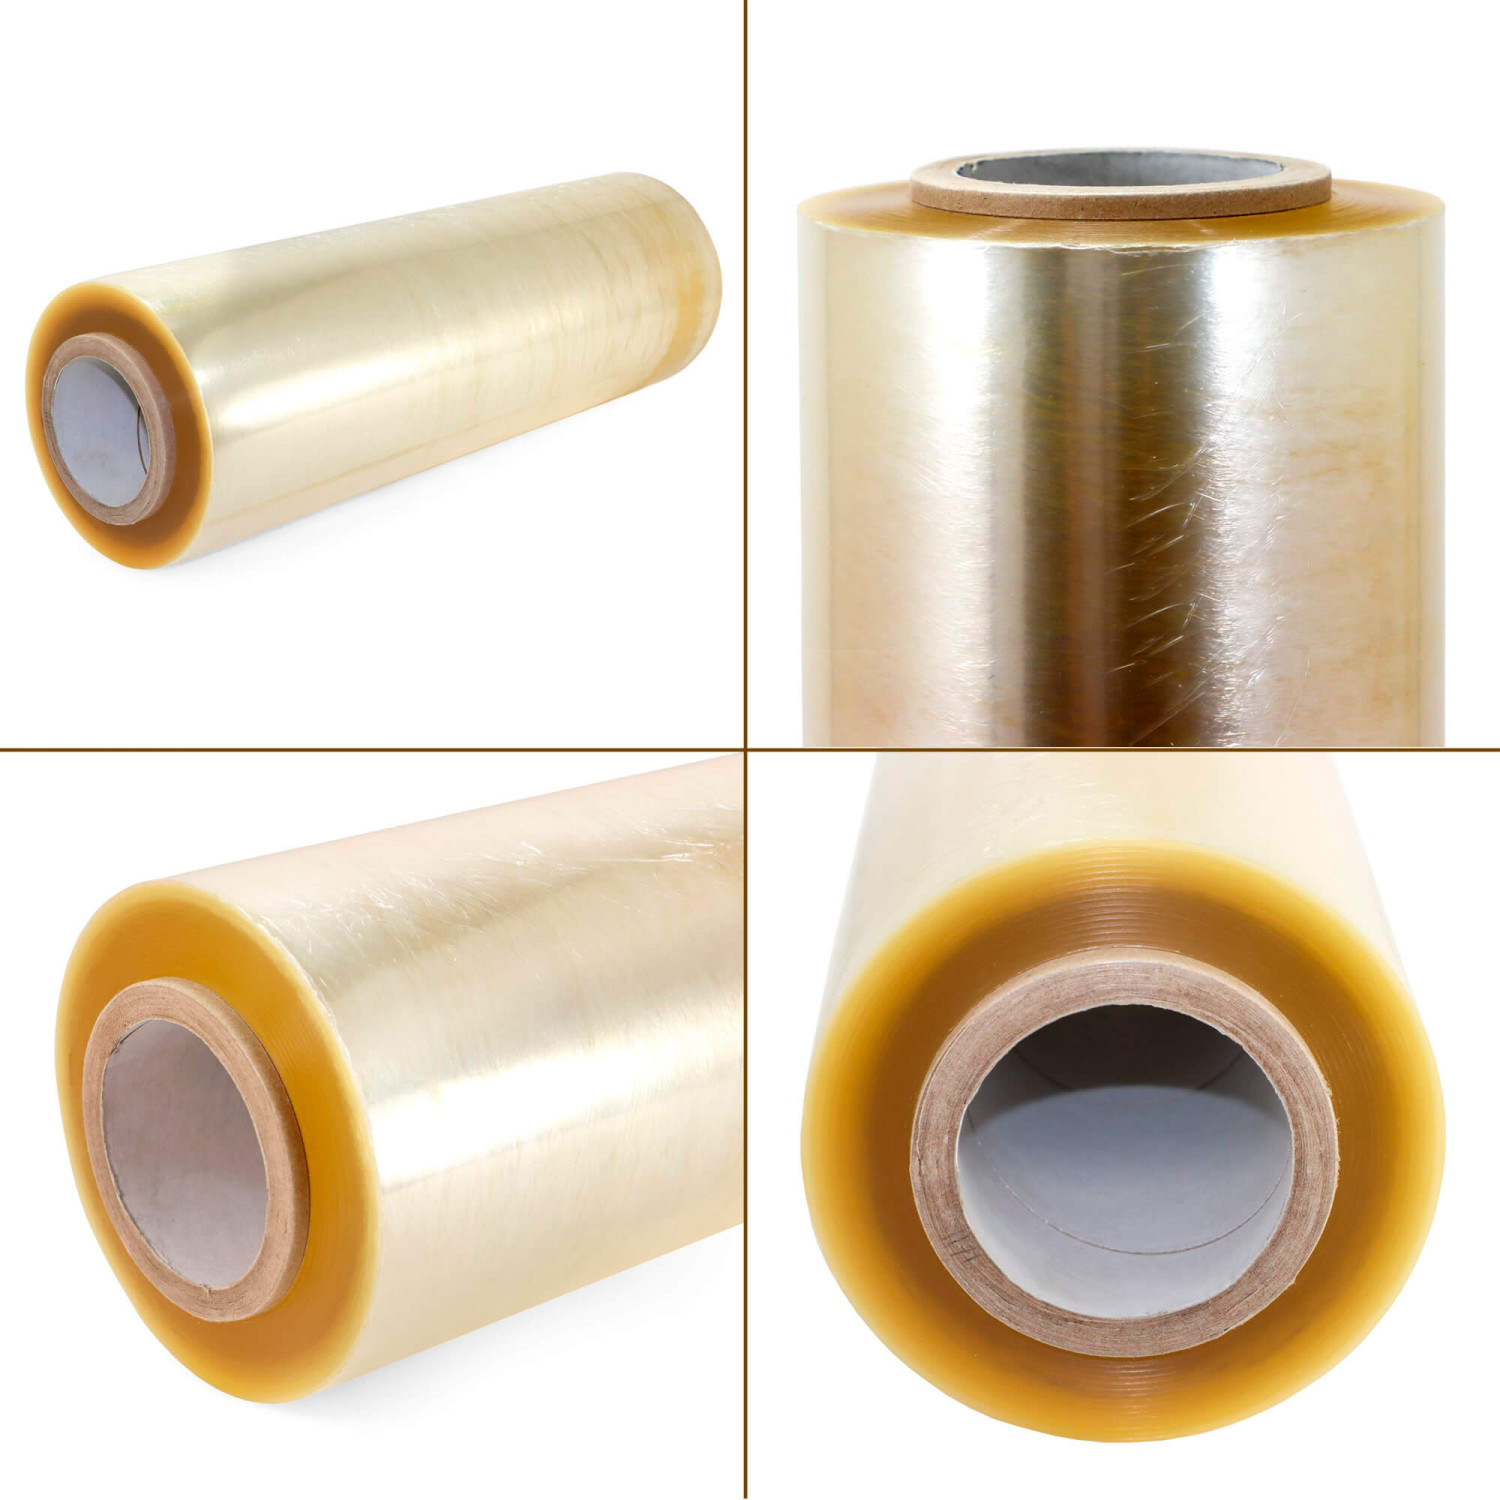 https://idlpack.com/image/cache/catalog/Products/Food-Film/Use-cases/IDL-Packaging-Strong-PVC-Cling-Food-Film-Wrap-Refill-Roll-1500x1500.jpg